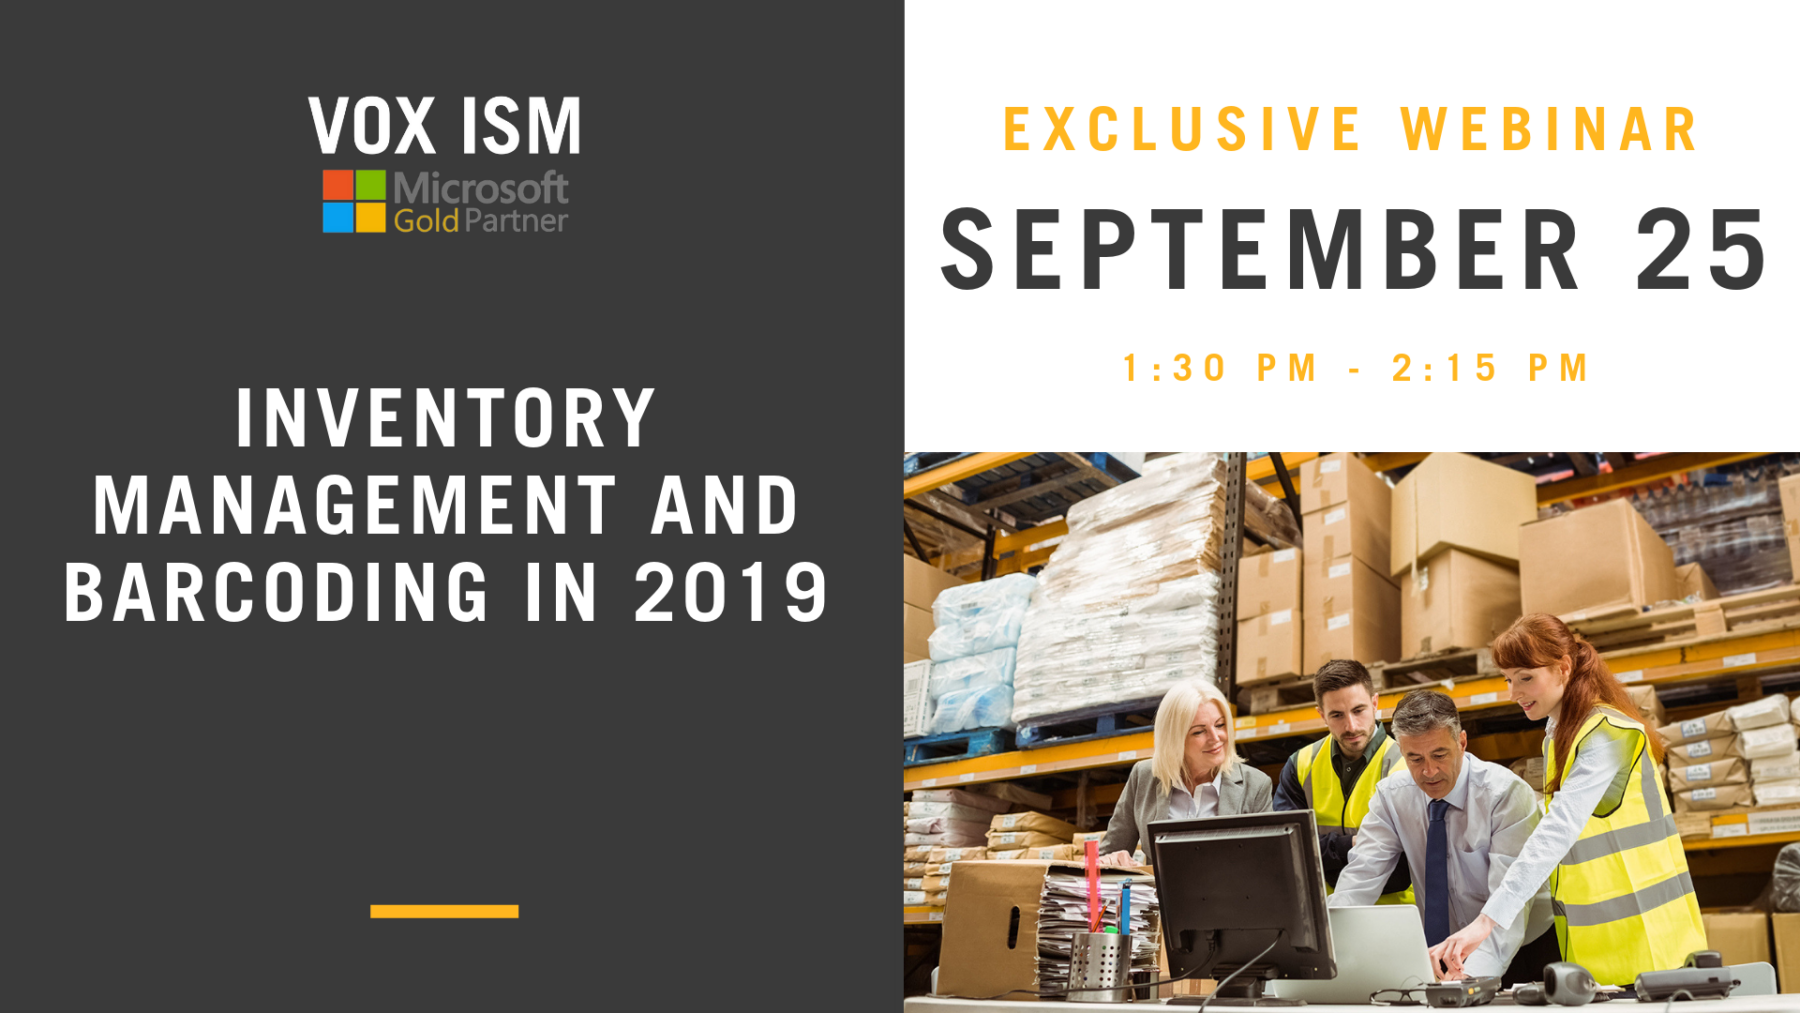 Inventory Management and Barcoding in 2019 - September 25 - Webinar - VOX ISM